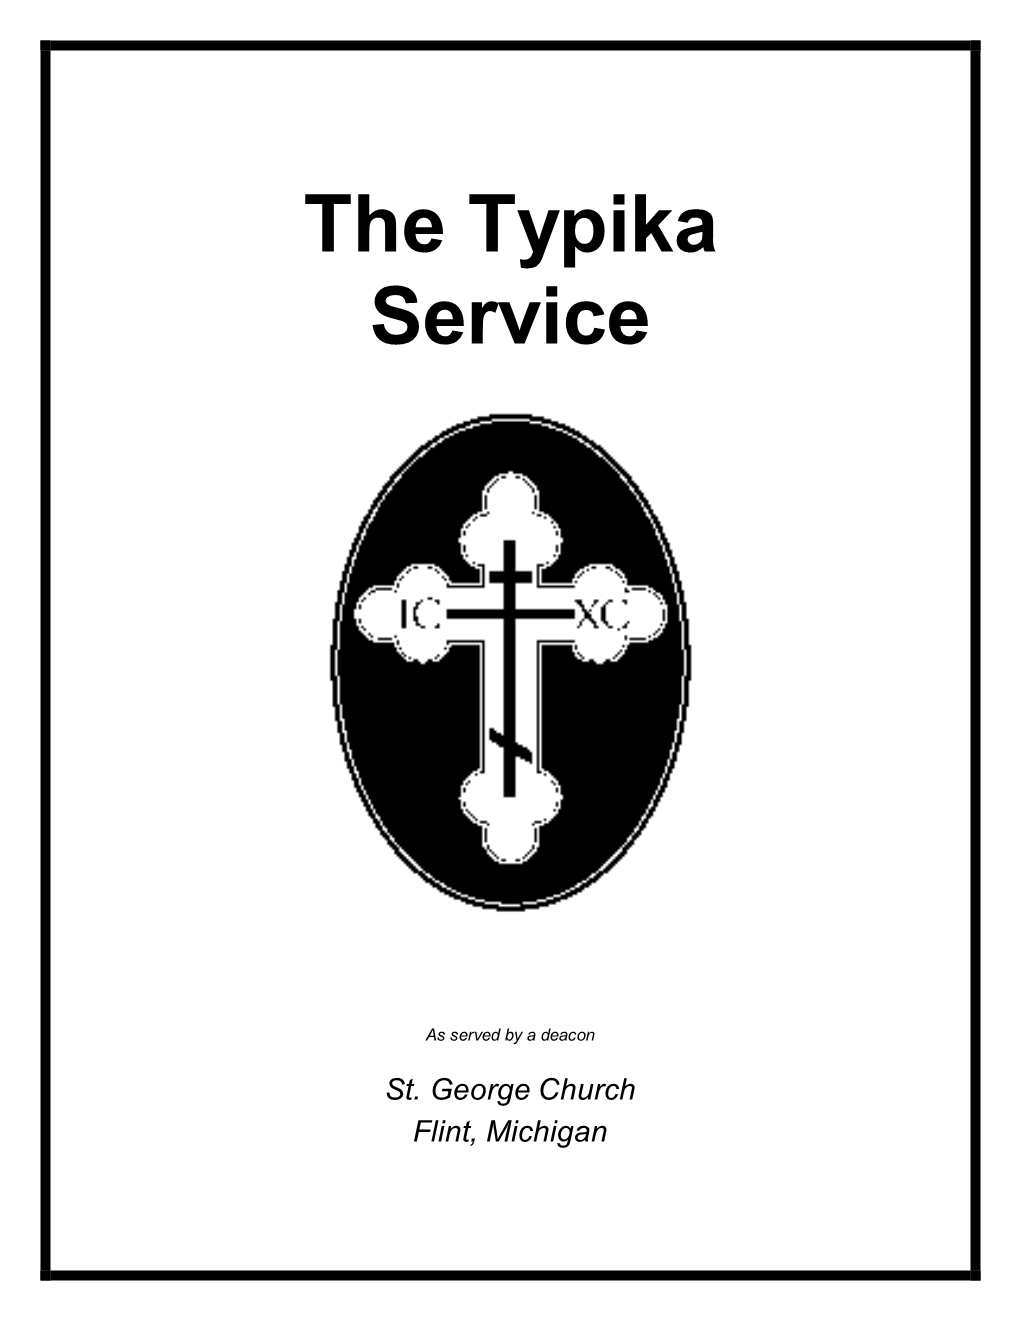 The Typika Service